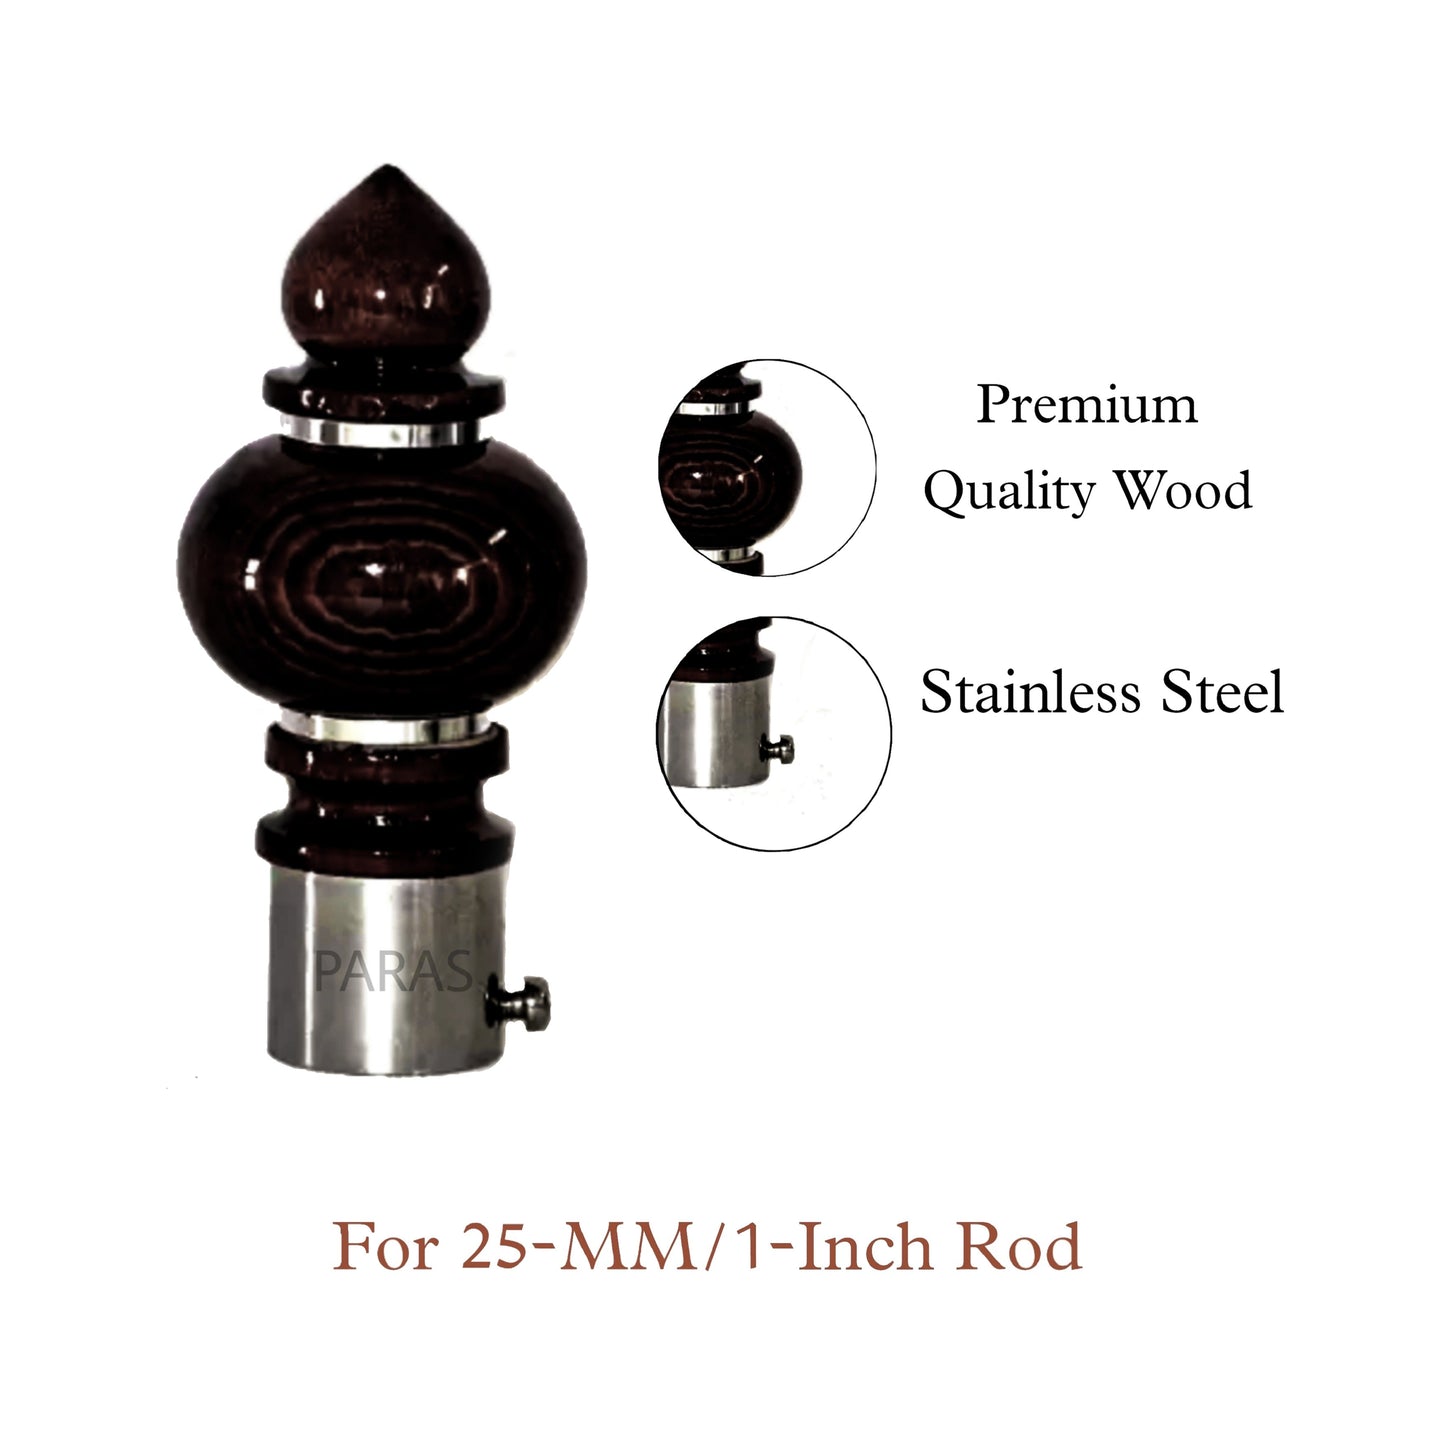 Buy Paras Wooden Stainless Steel Curtain Bracket Finials